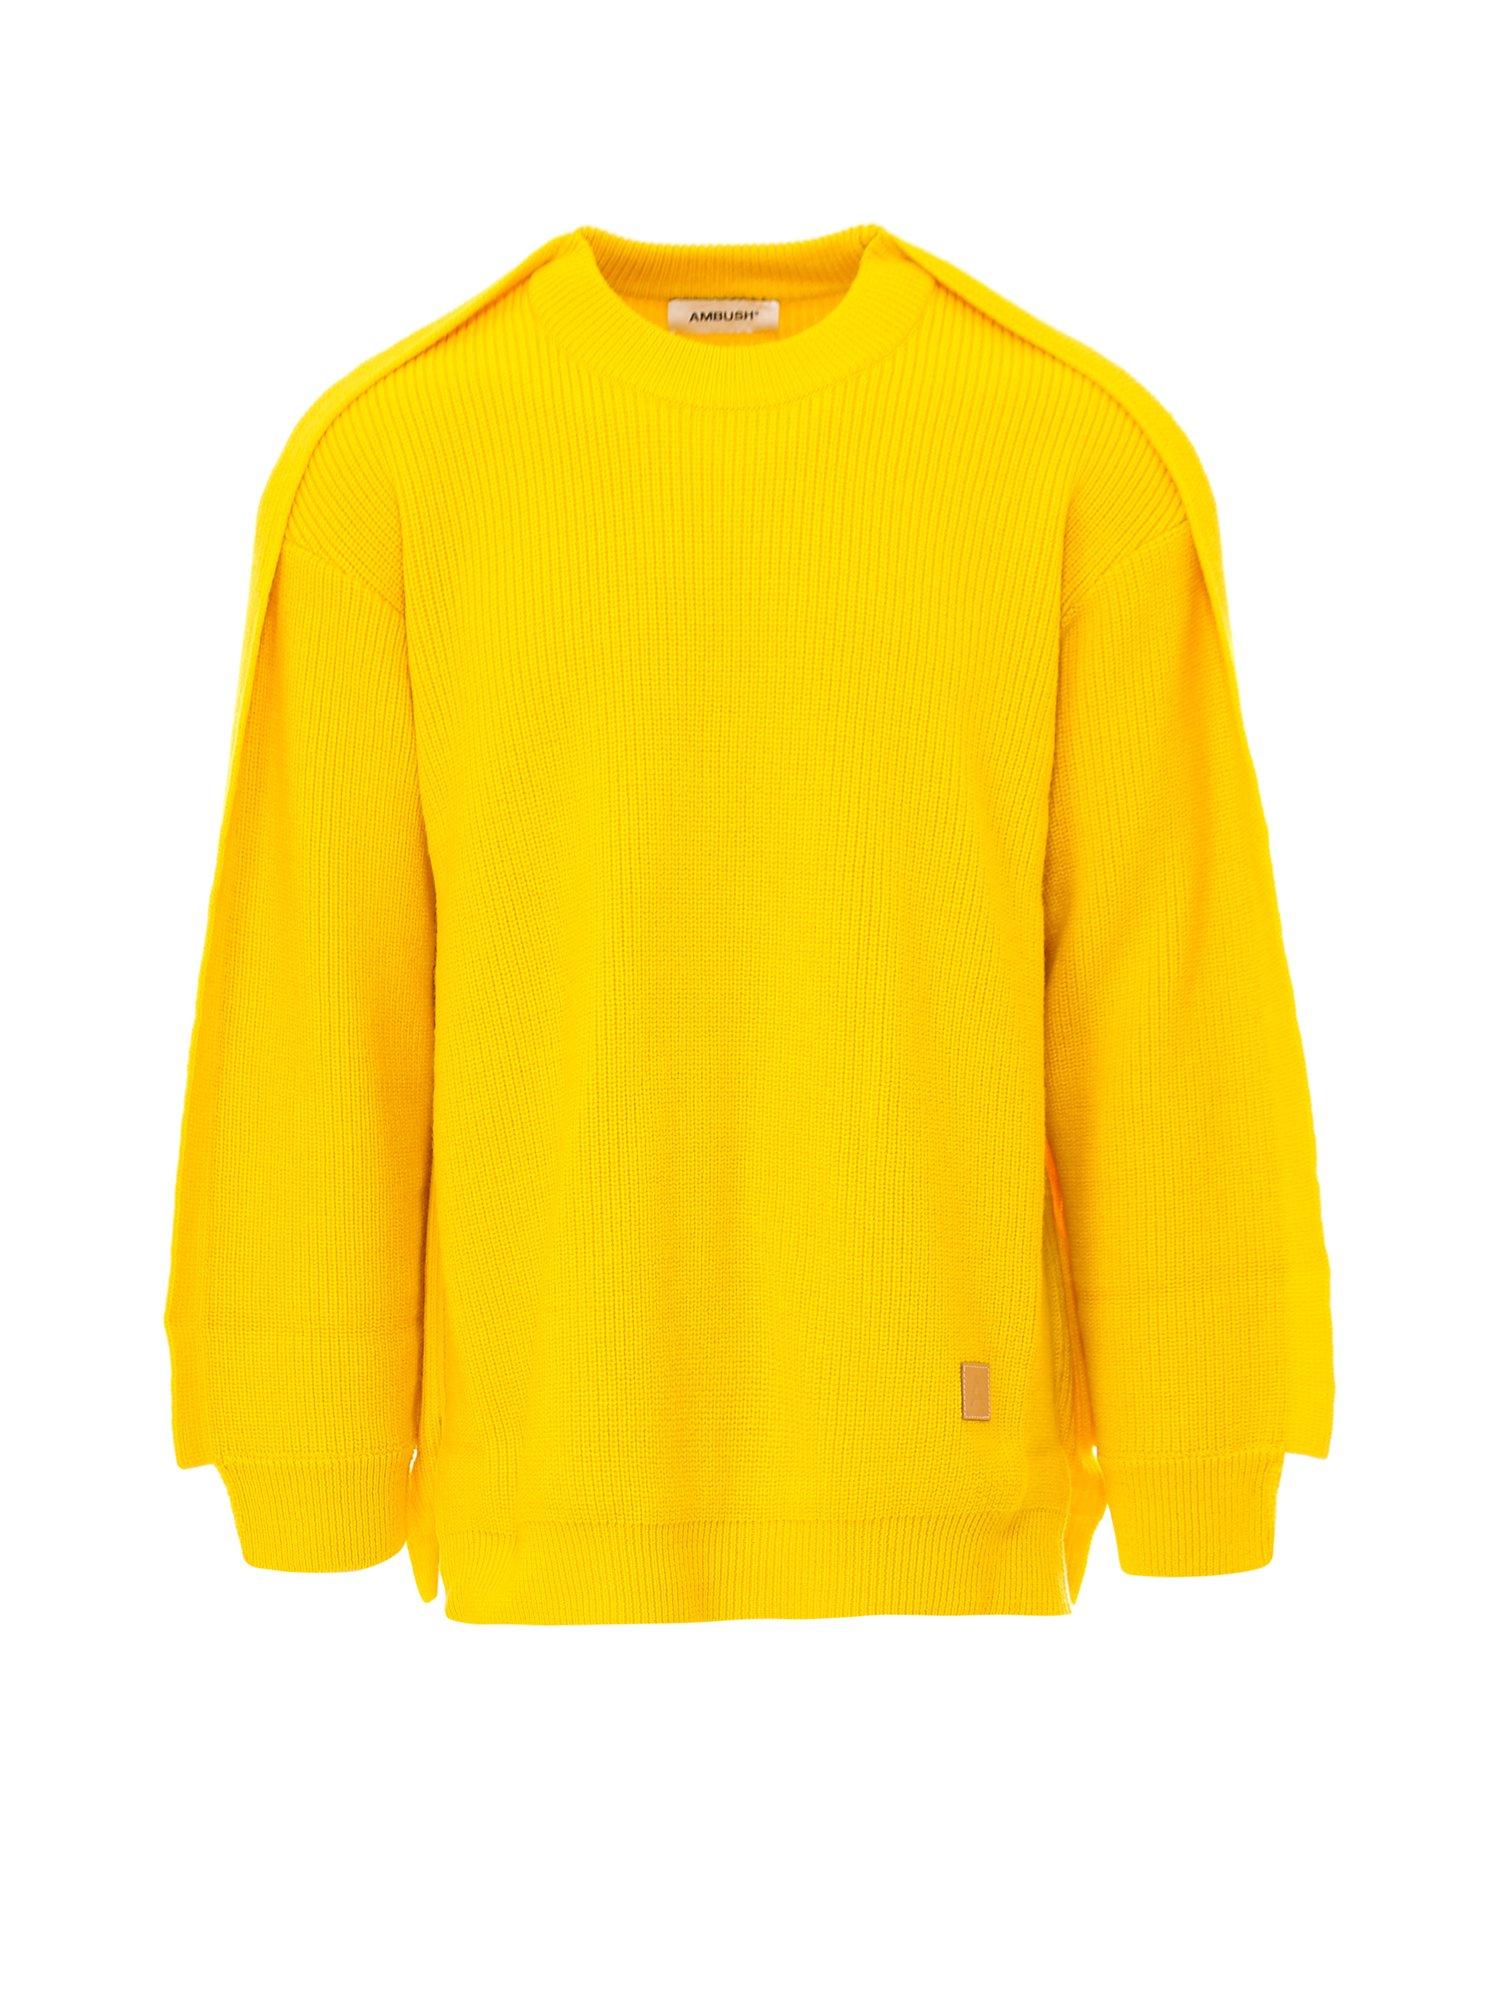 Ambush Wool Crewneck Ribbed Knit Sweater in Yellow for Men - Lyst